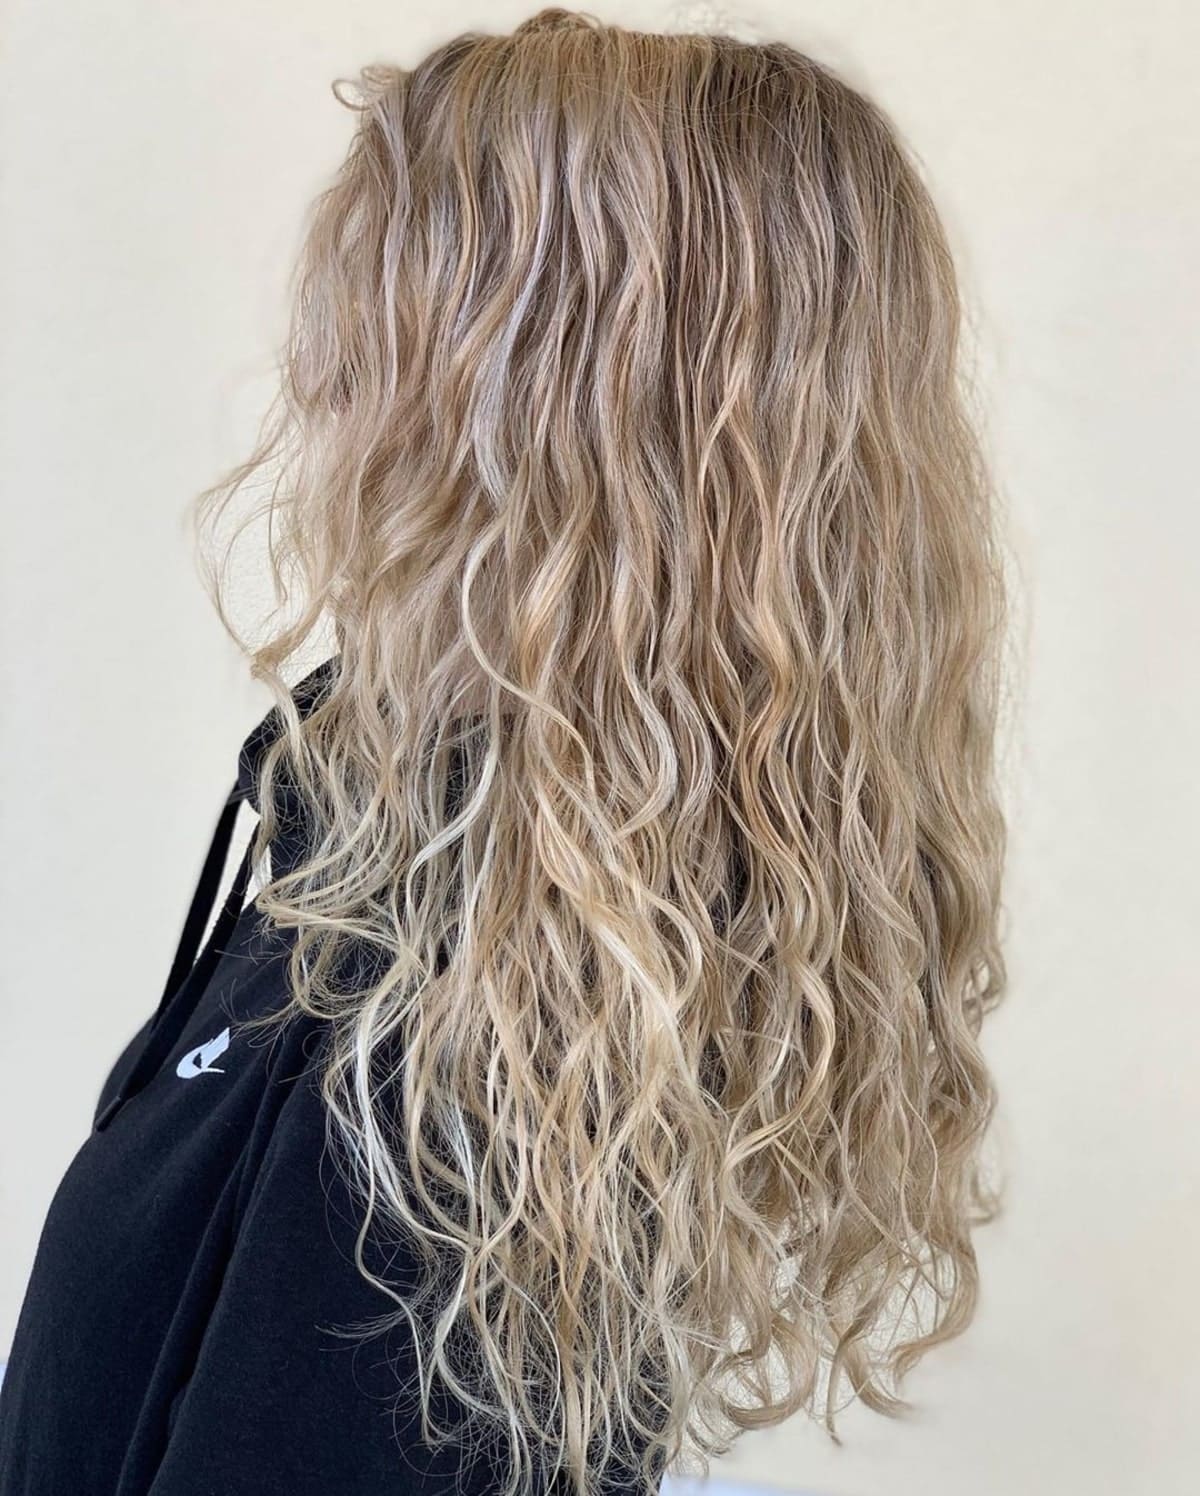 15 Pictures of Partial Highlights That Are Simply Stunning